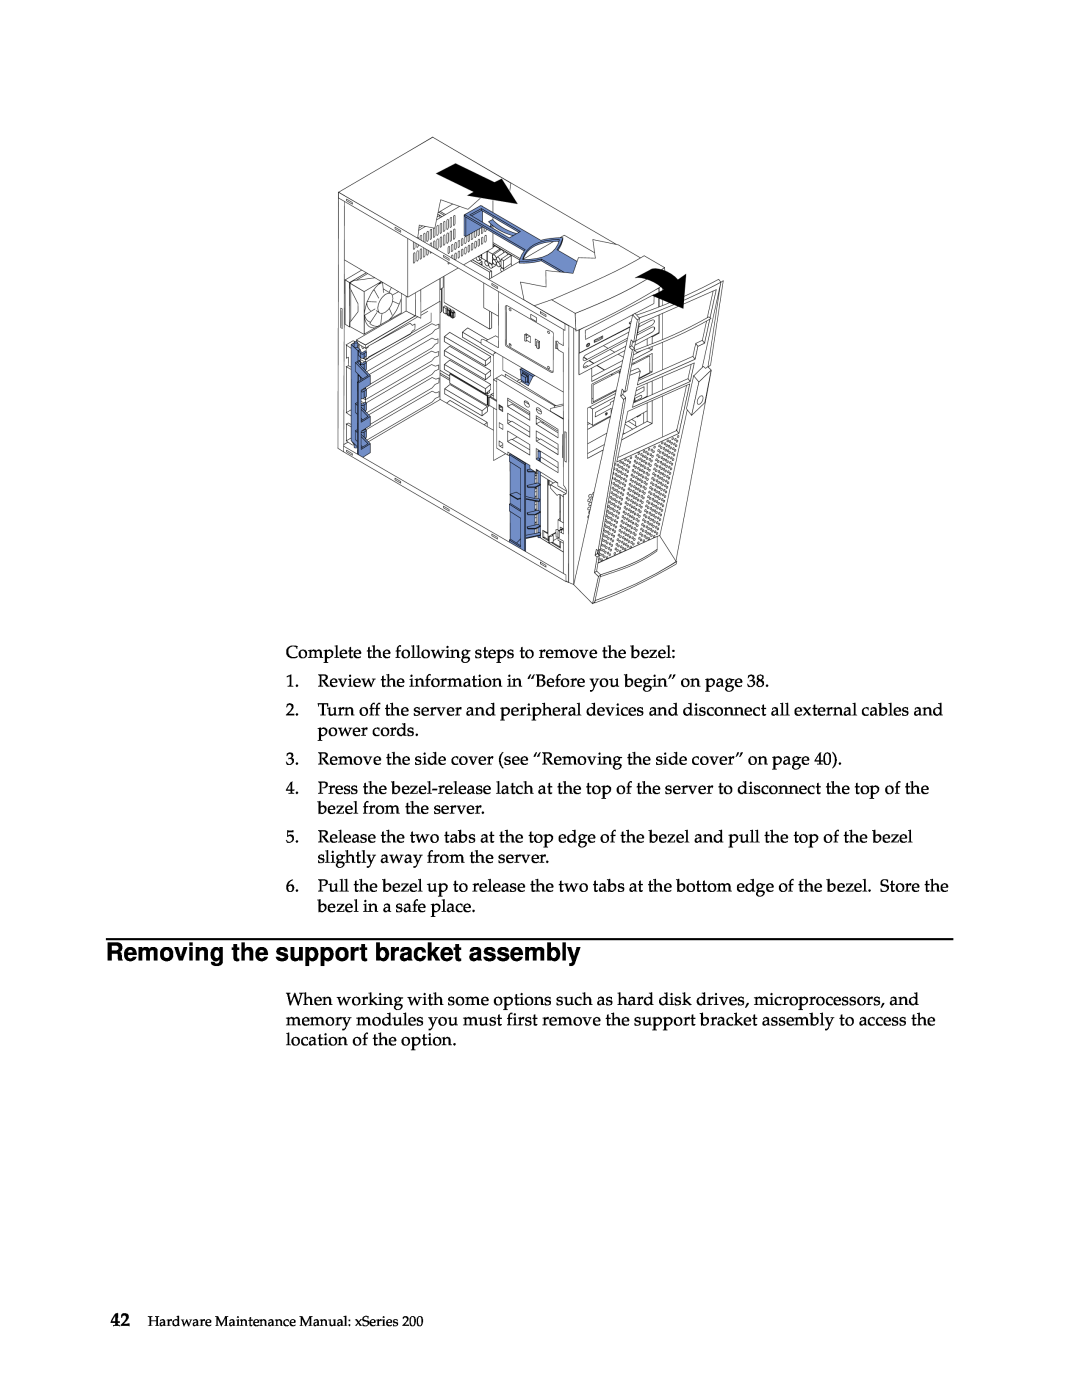 IBM x Series 200 manual Removing the support bracket assembly, Hardware Maintenance Manual xSeries 